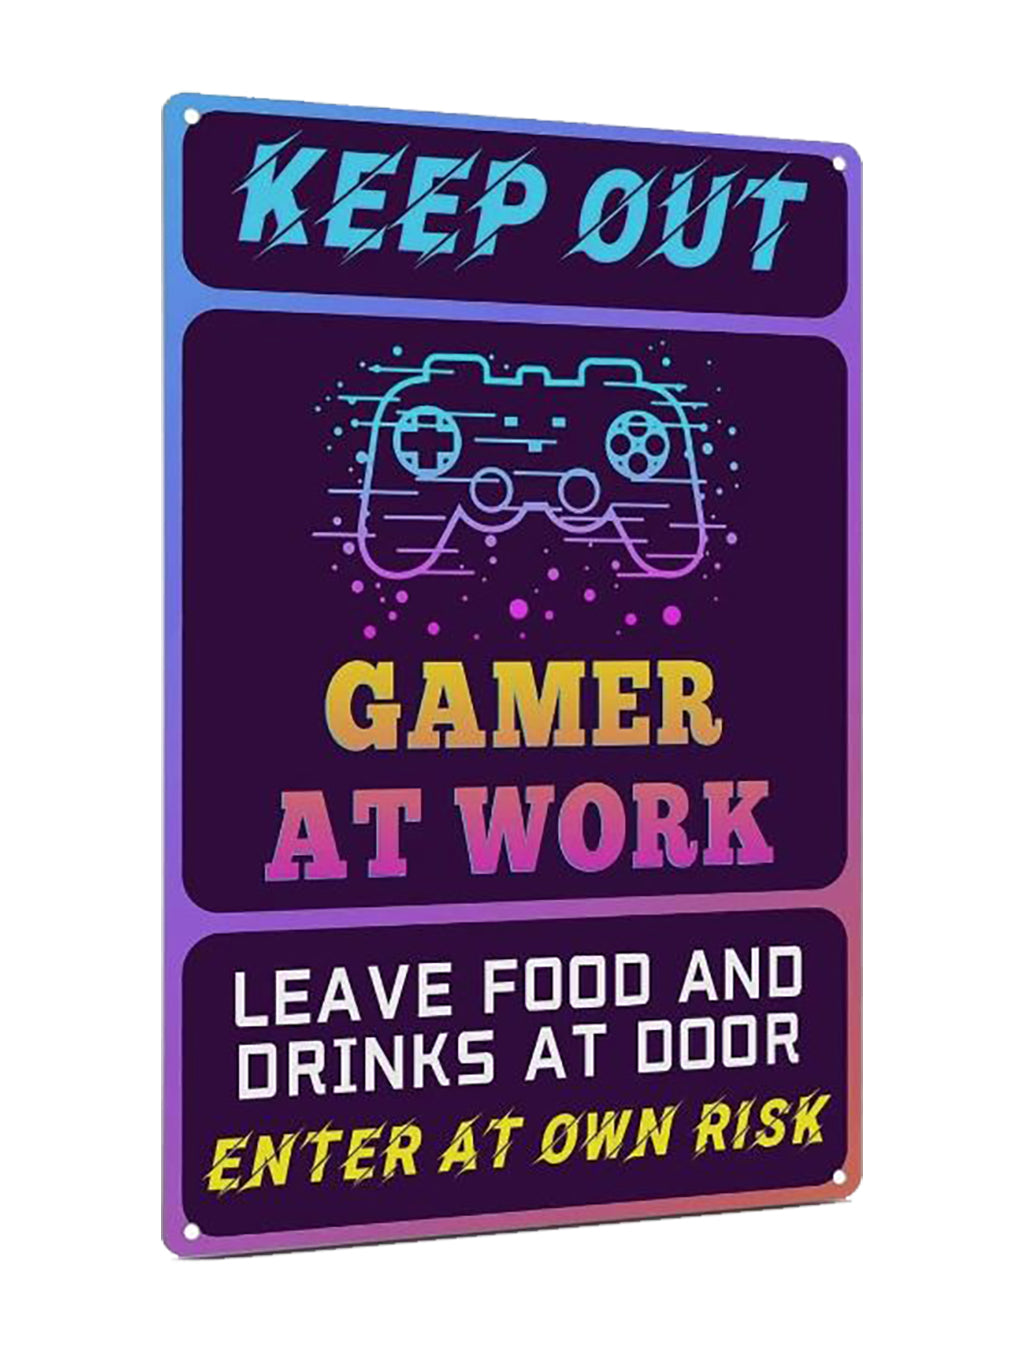 Keep Out - Gamer Retro Metal Sign